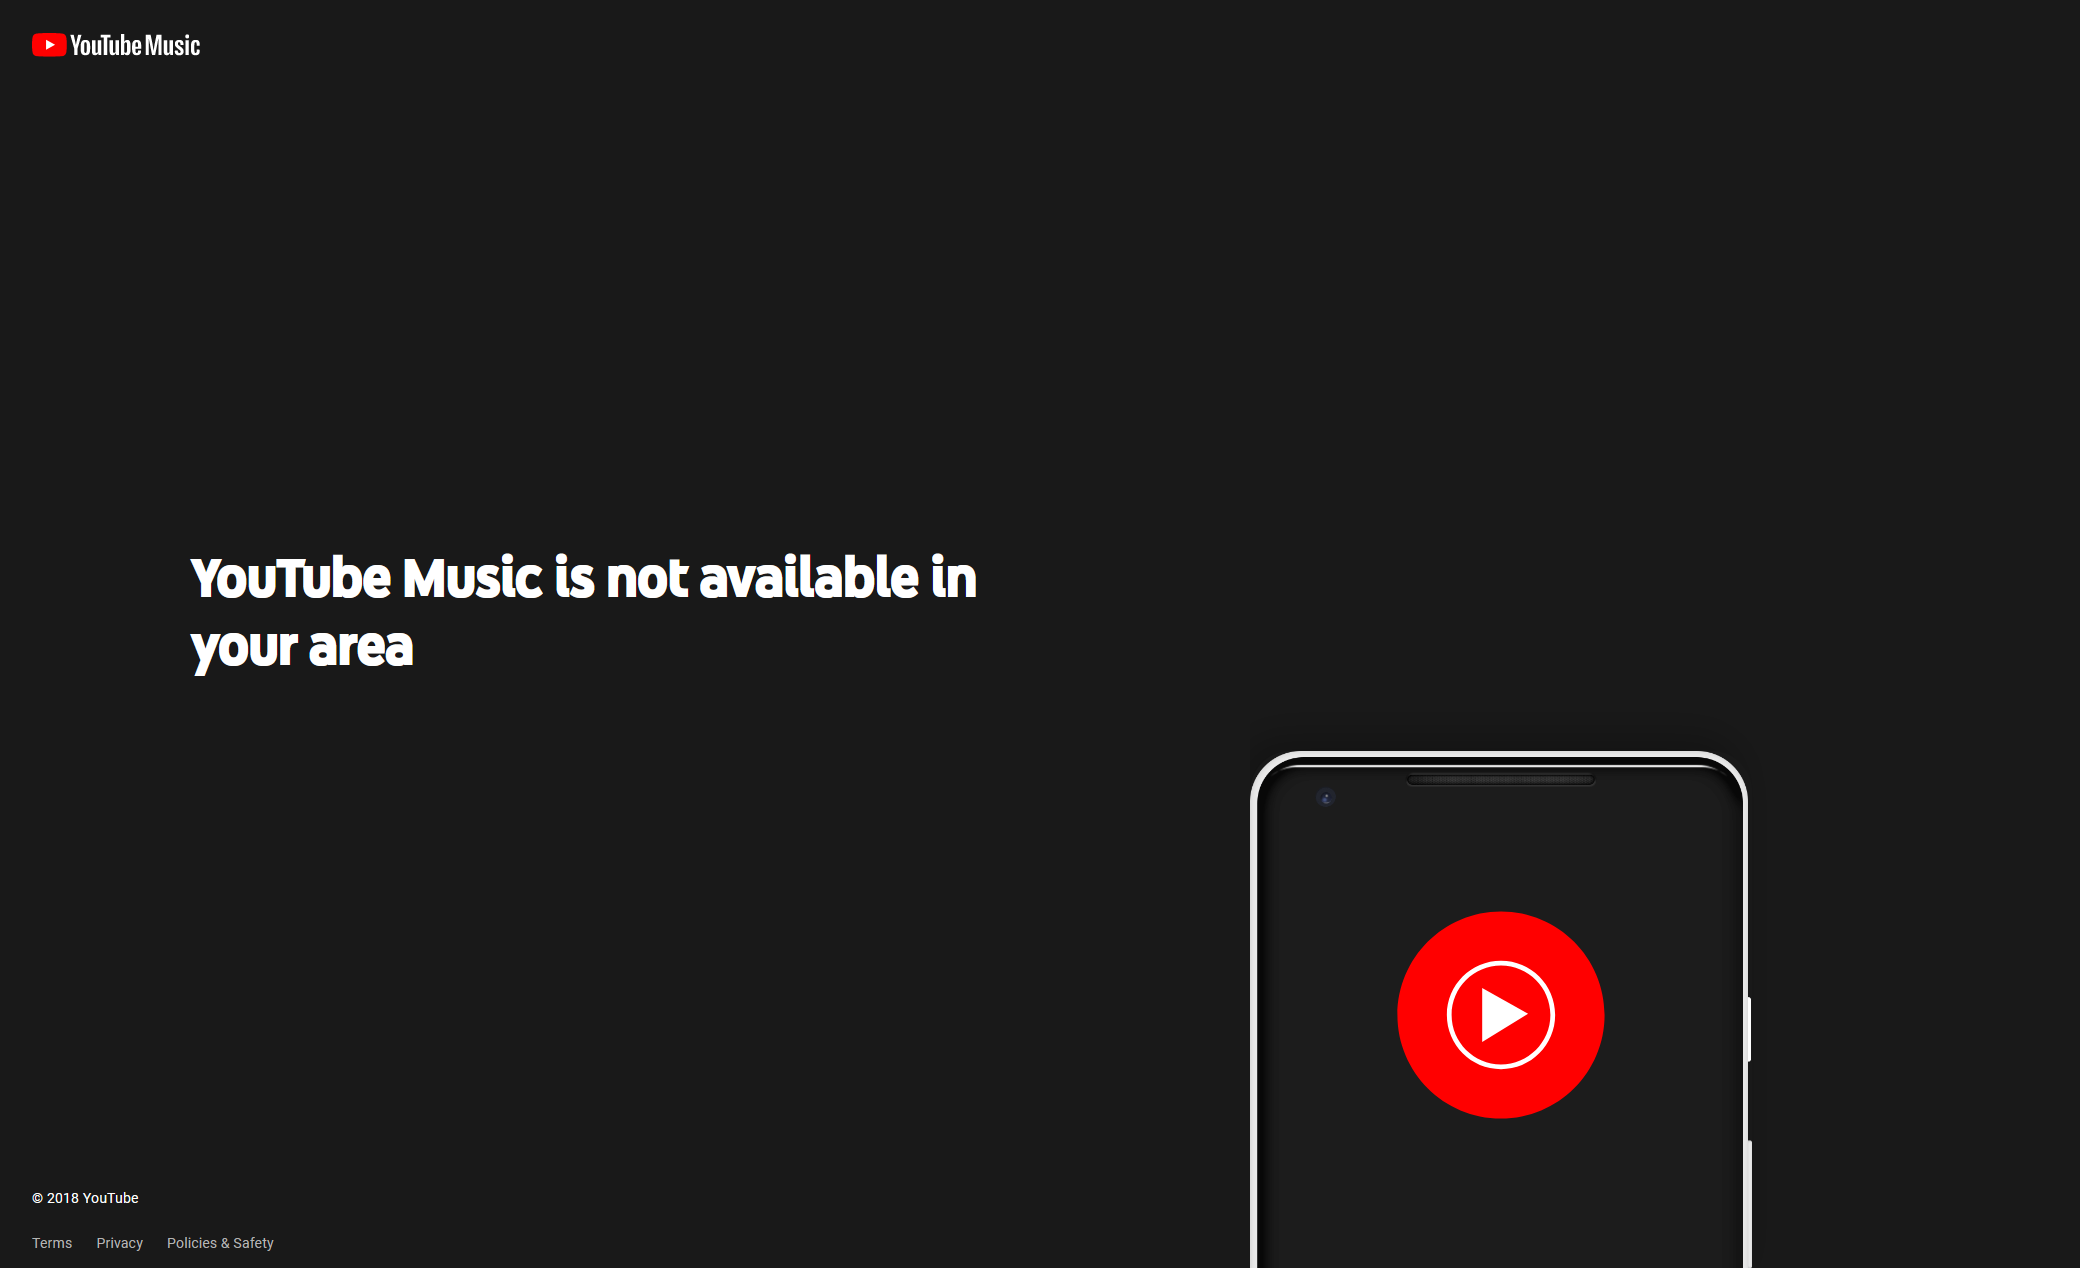 YouTube Music is not available in your area